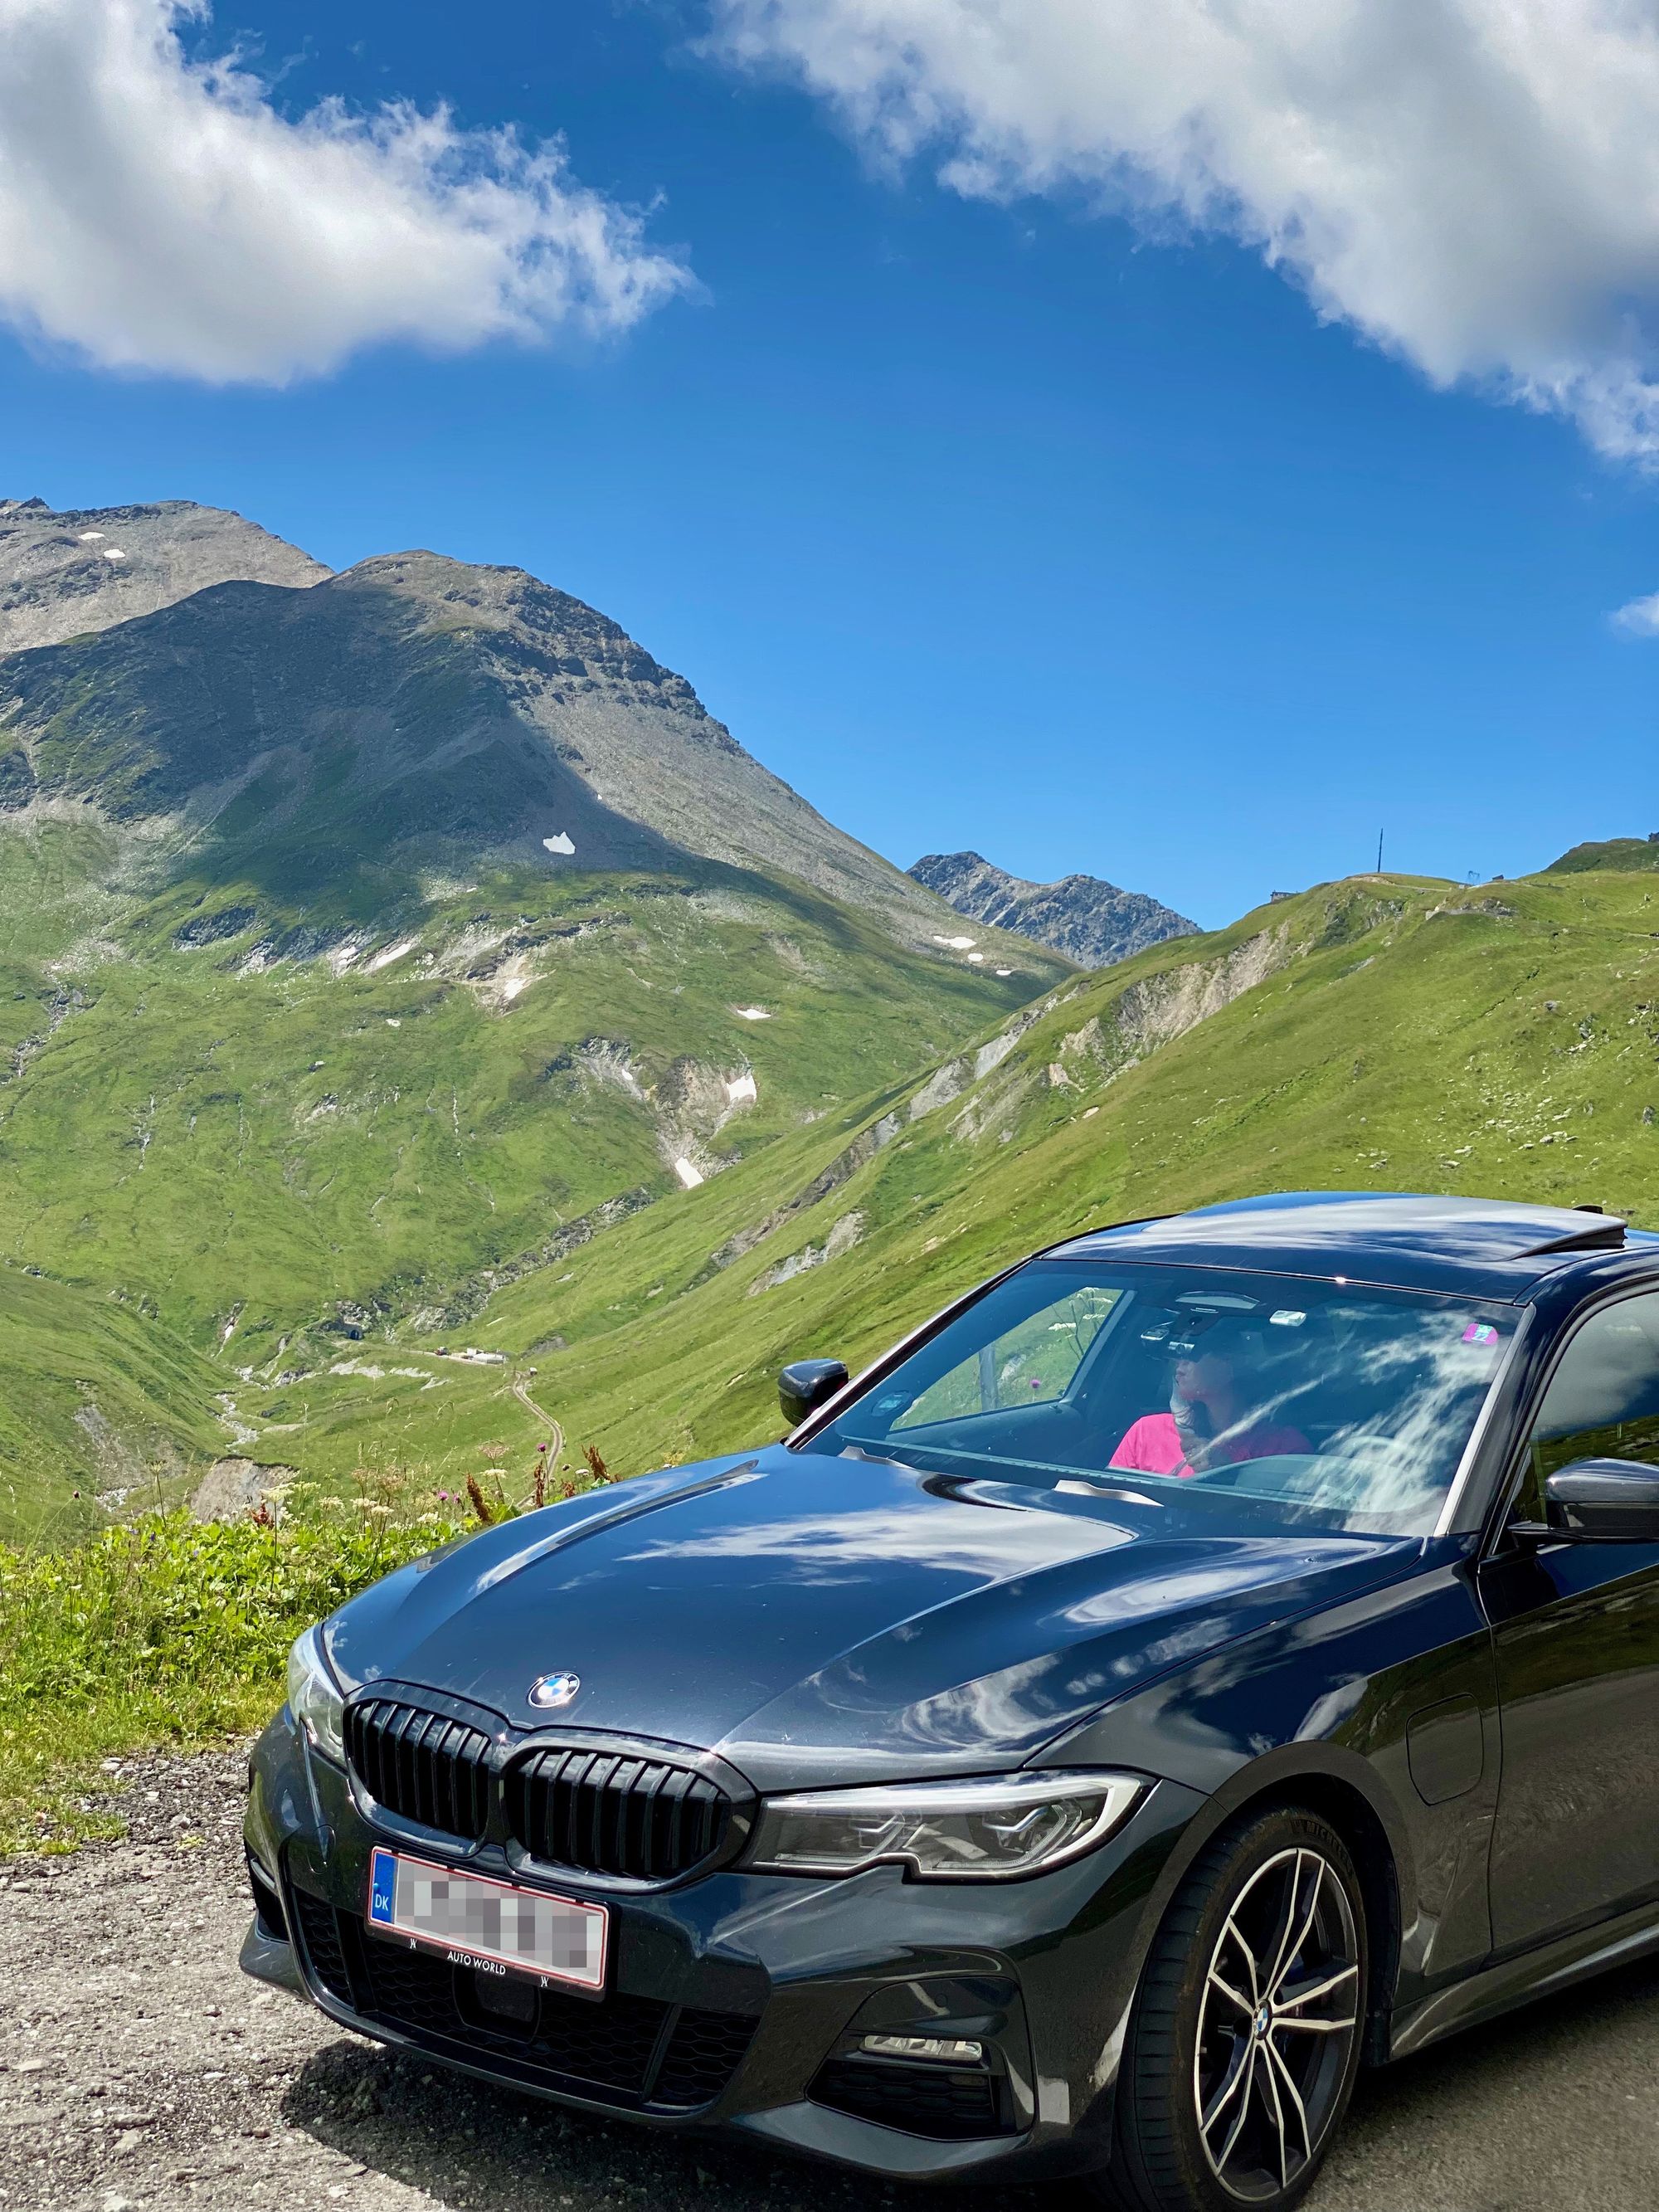 Our car stopped somewhere on a mountain pass in the alps